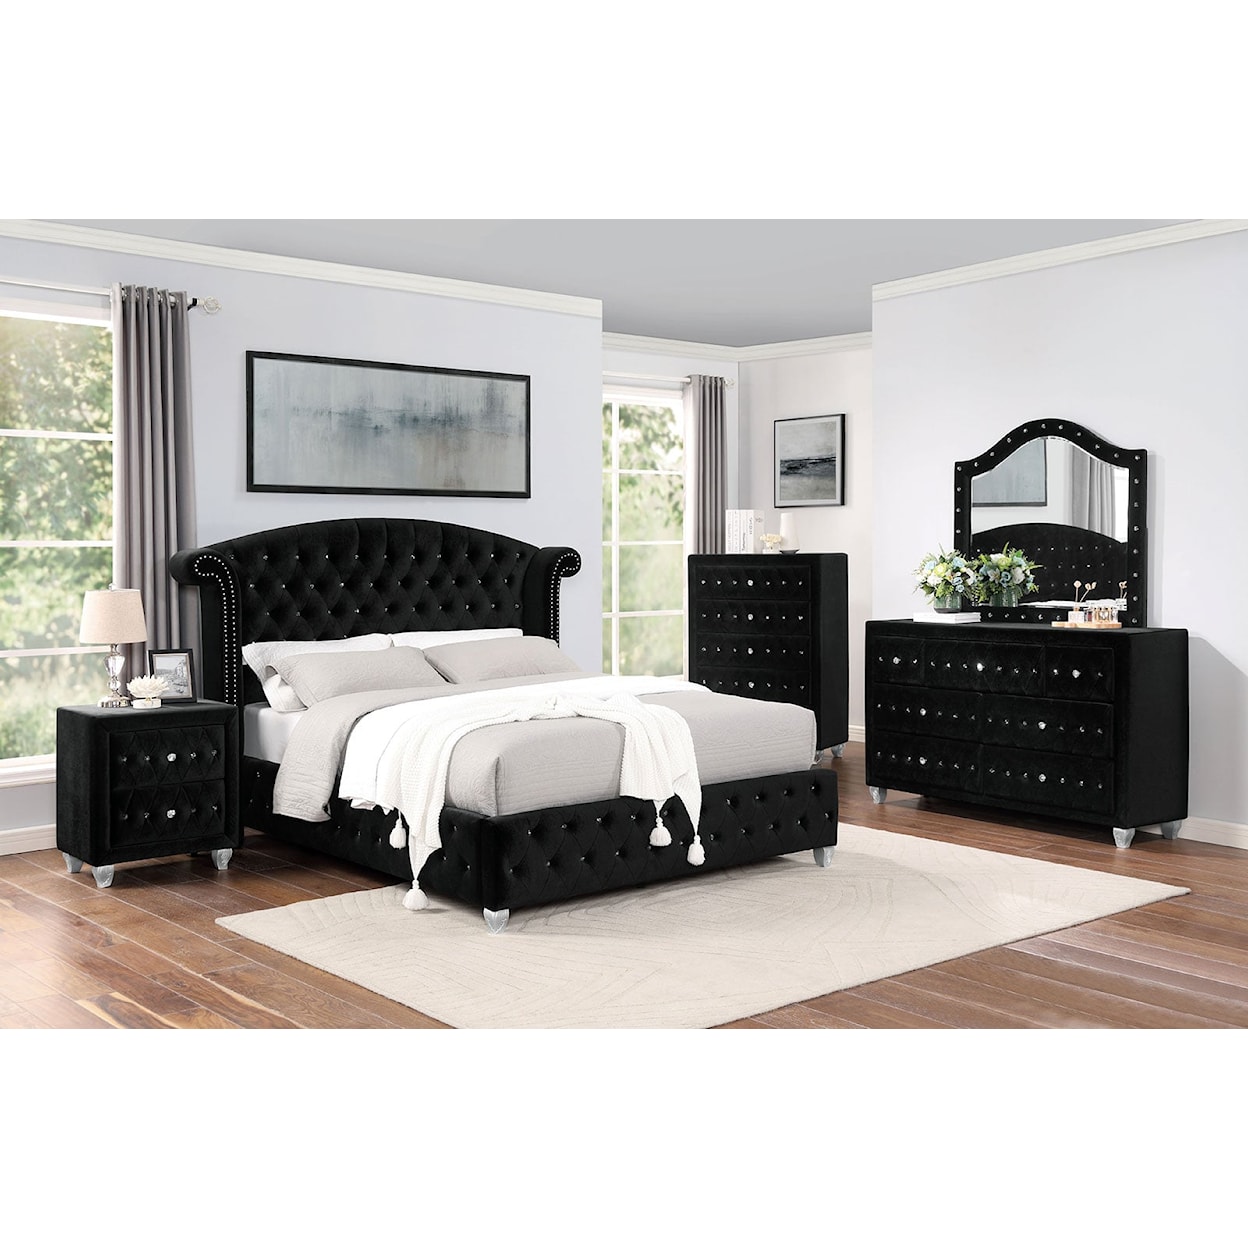 Furniture of America Zohar 5-Piece Queen Bedroom Set with Chest